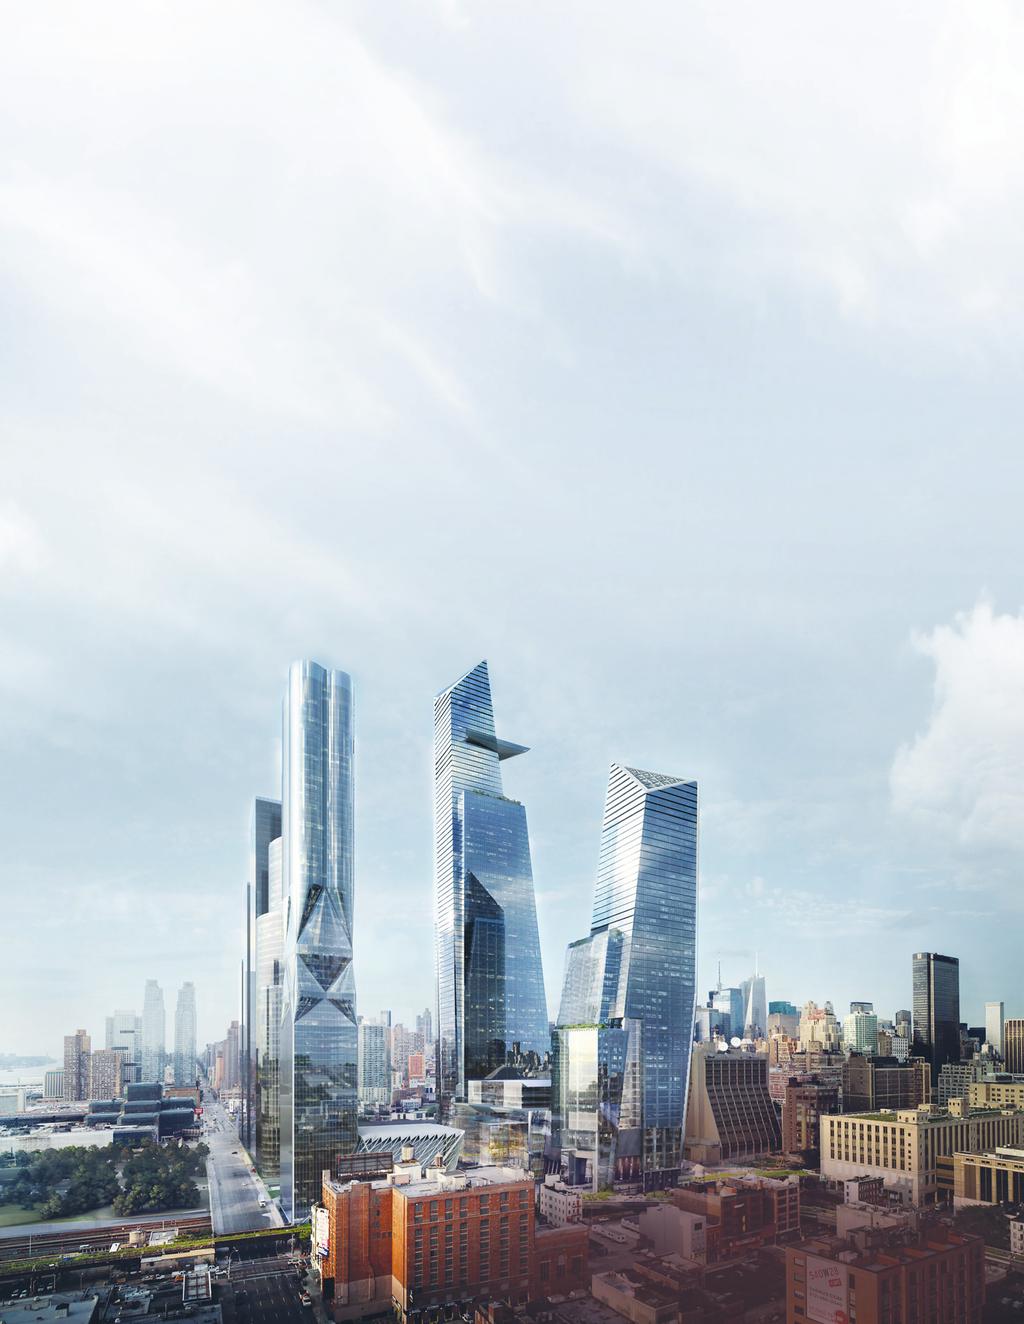 HUDSON YARDS DISTRICT AT 10 NEW YORK S NEWEST NEIGHBORHOOD TAKES SHAPE A critical look at the creation, development and future of North America s largest urban redevelopment JUNE 18 8:30 AM 12:30 PM